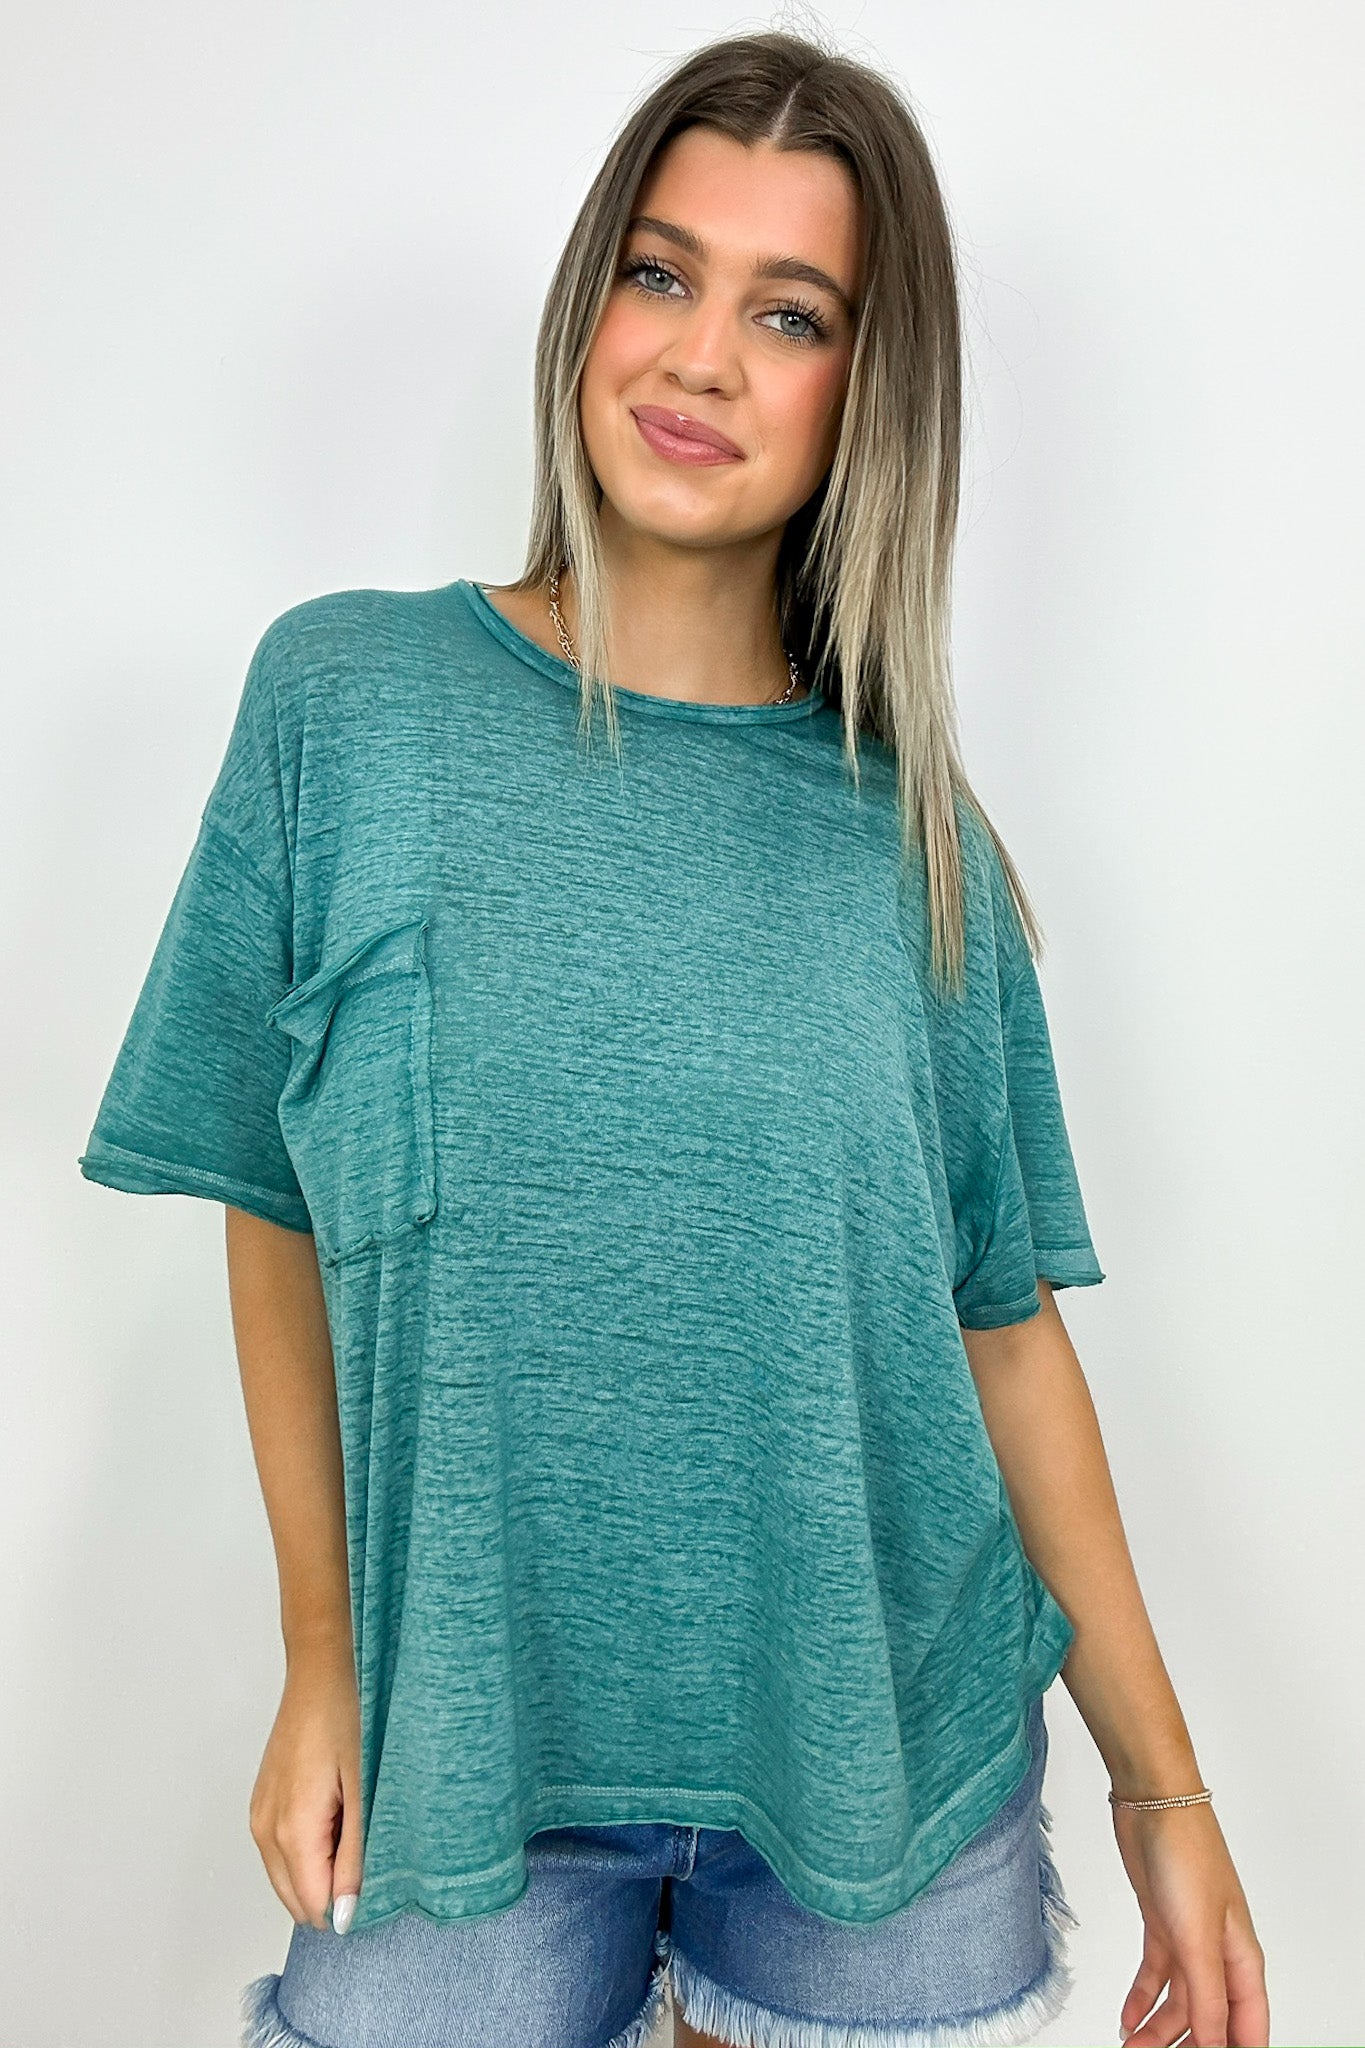 Dusty Teal / SM Marisol Burnout Wash Oversized Pocket Top - Madison and Mallory